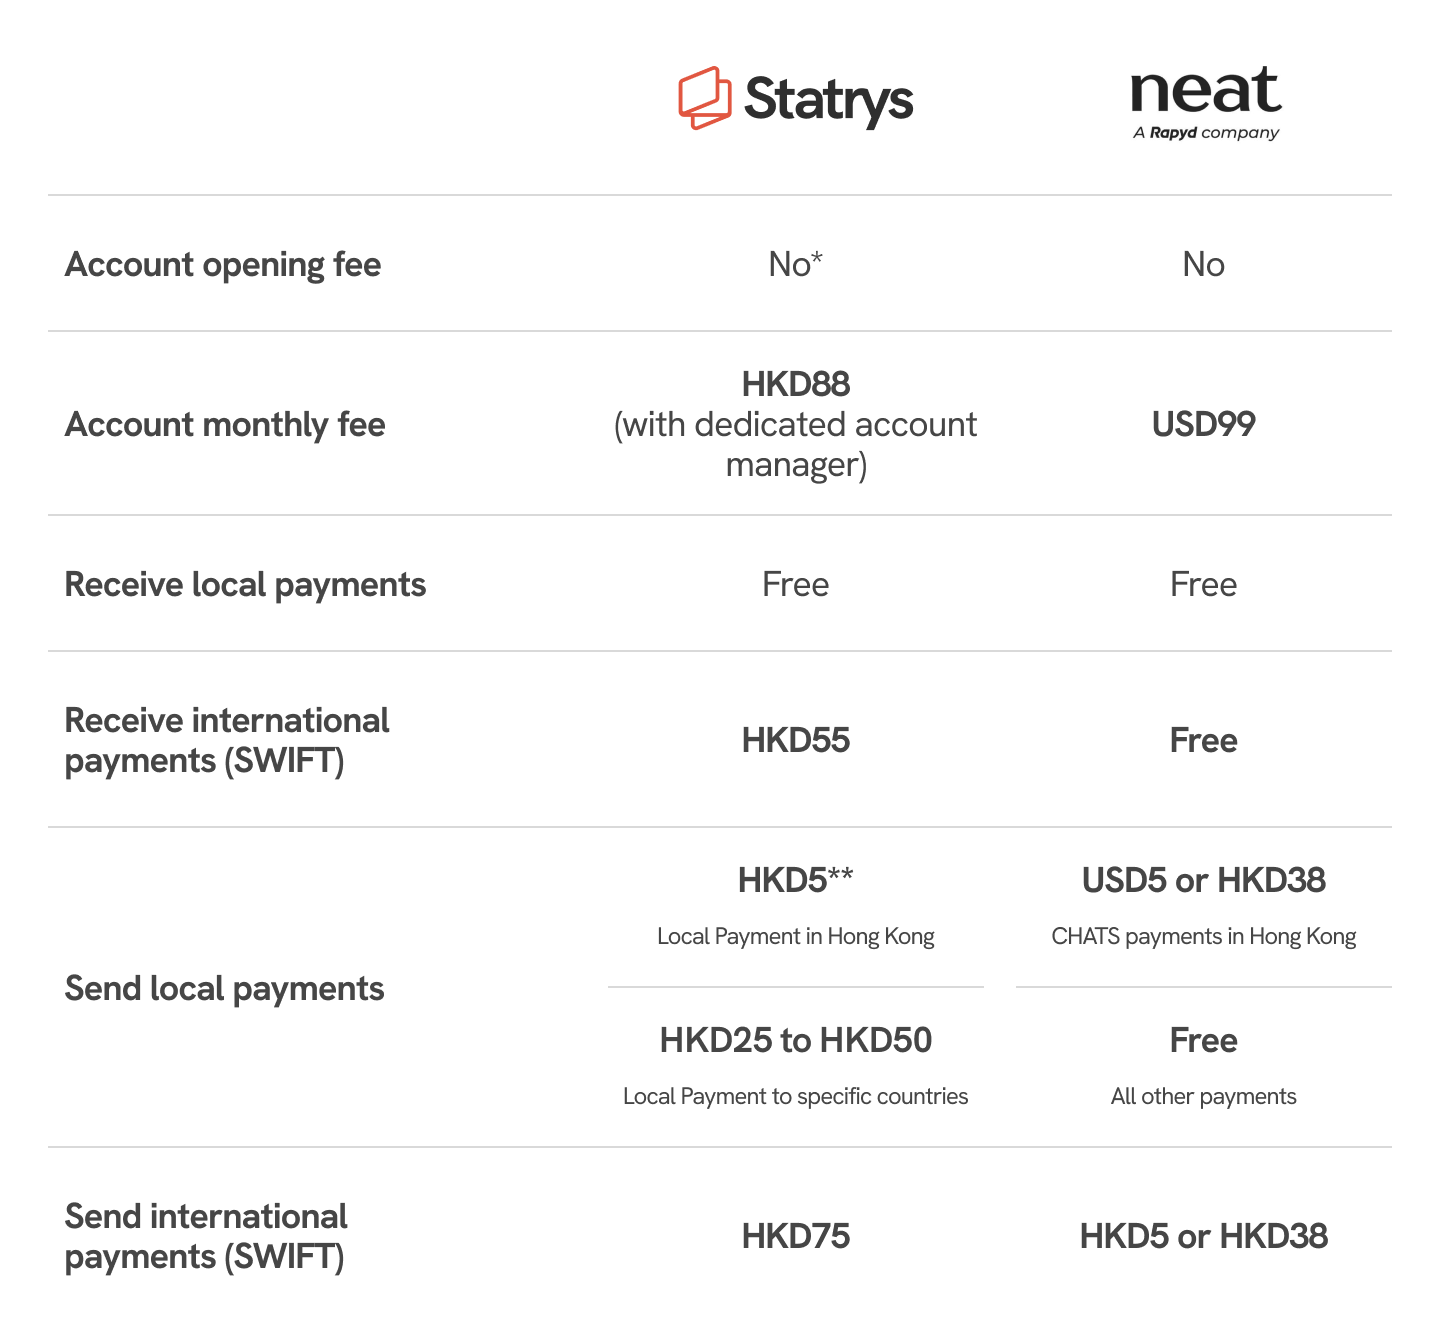 Neat vs Statrys pricing comparison table